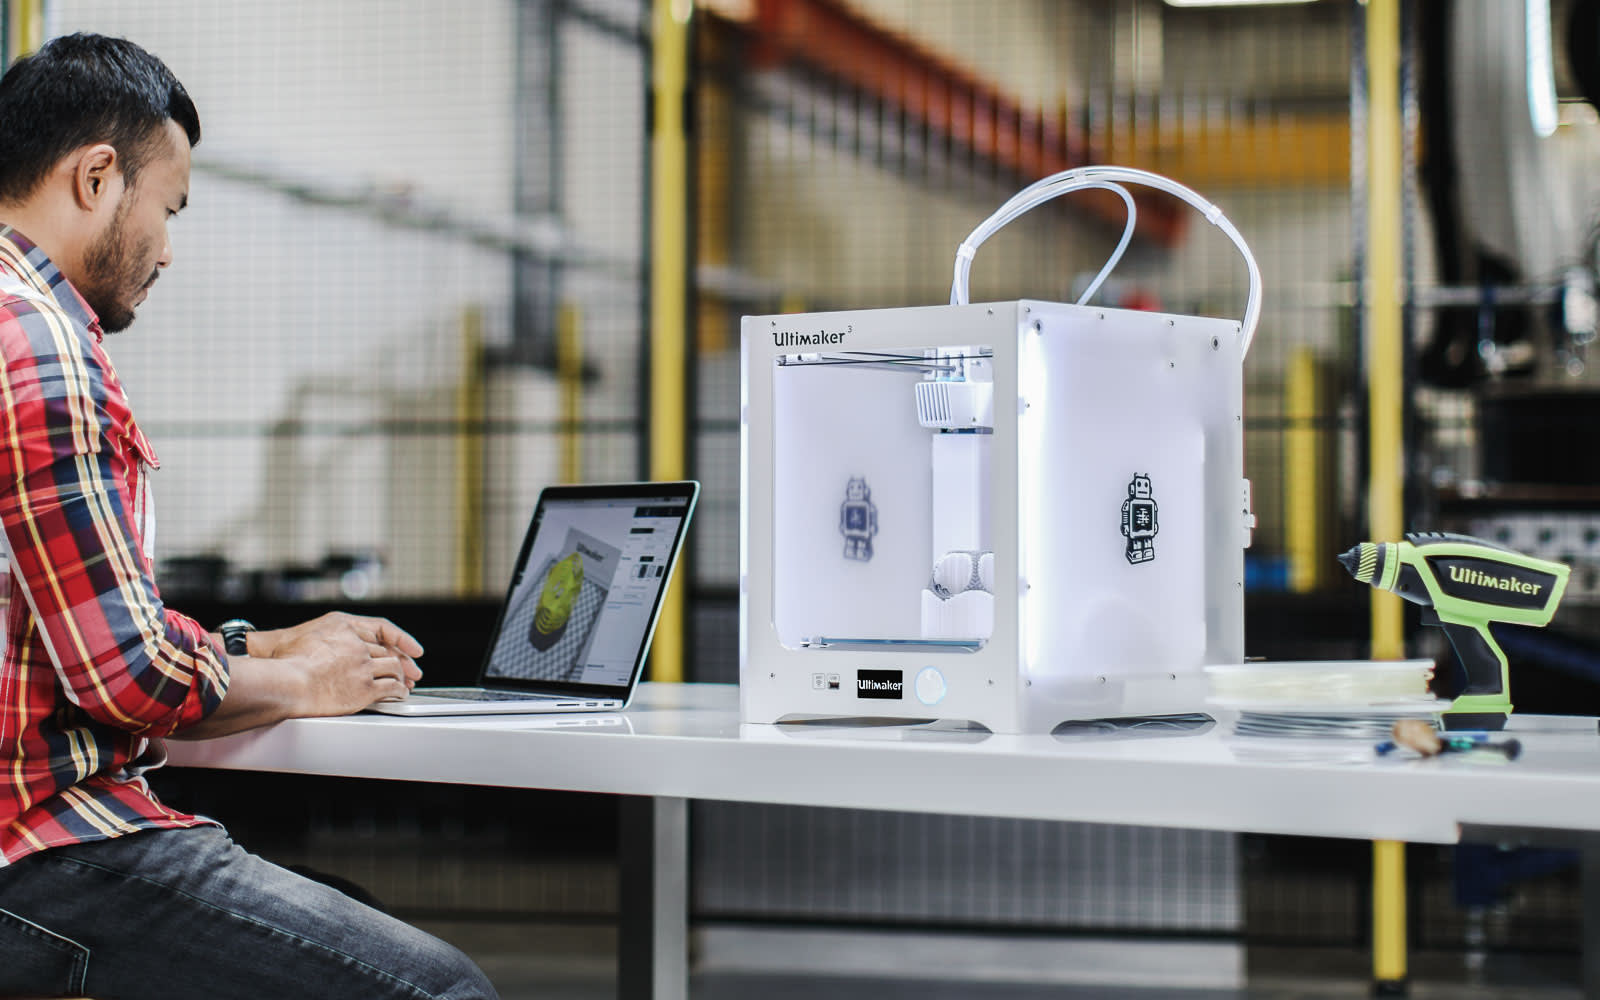 Desktop FDM are perfect for fast, user-friendly and cost-effective prototyping 
(image courtesy of Ultimaker).